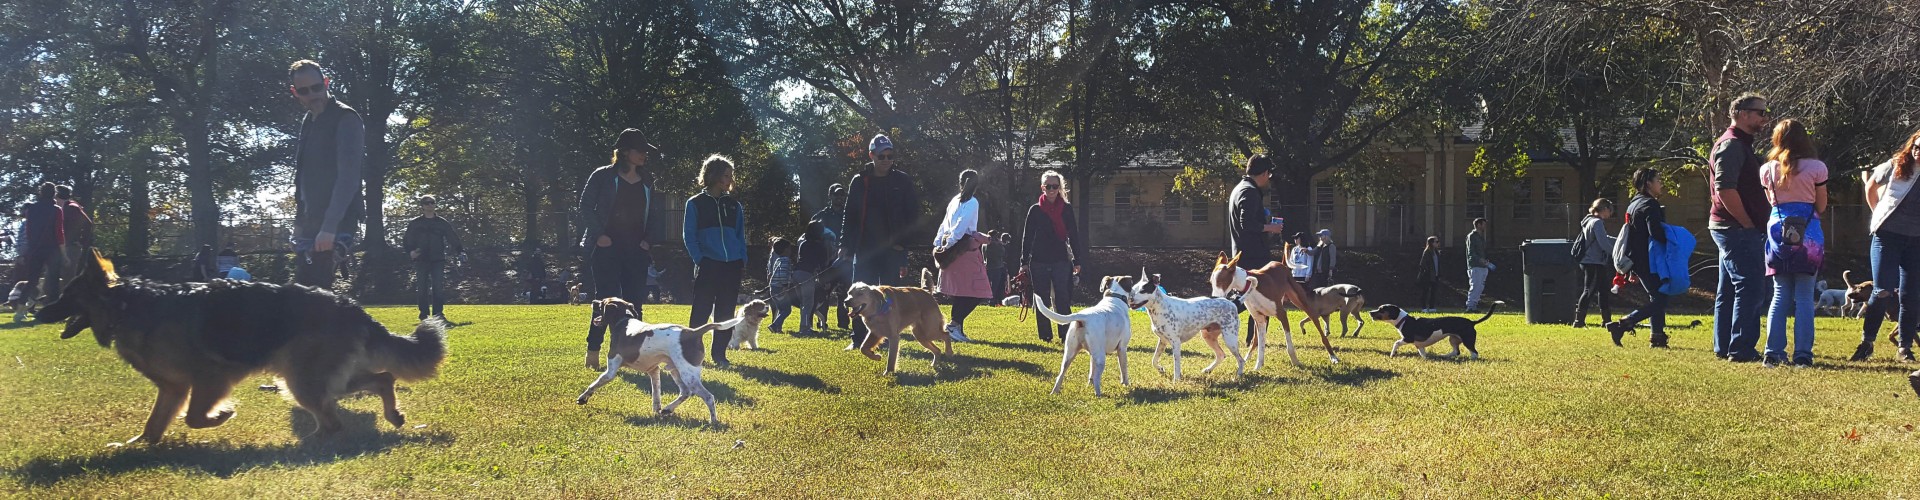 People and off-leash dogs at the Dix Park Dog Park